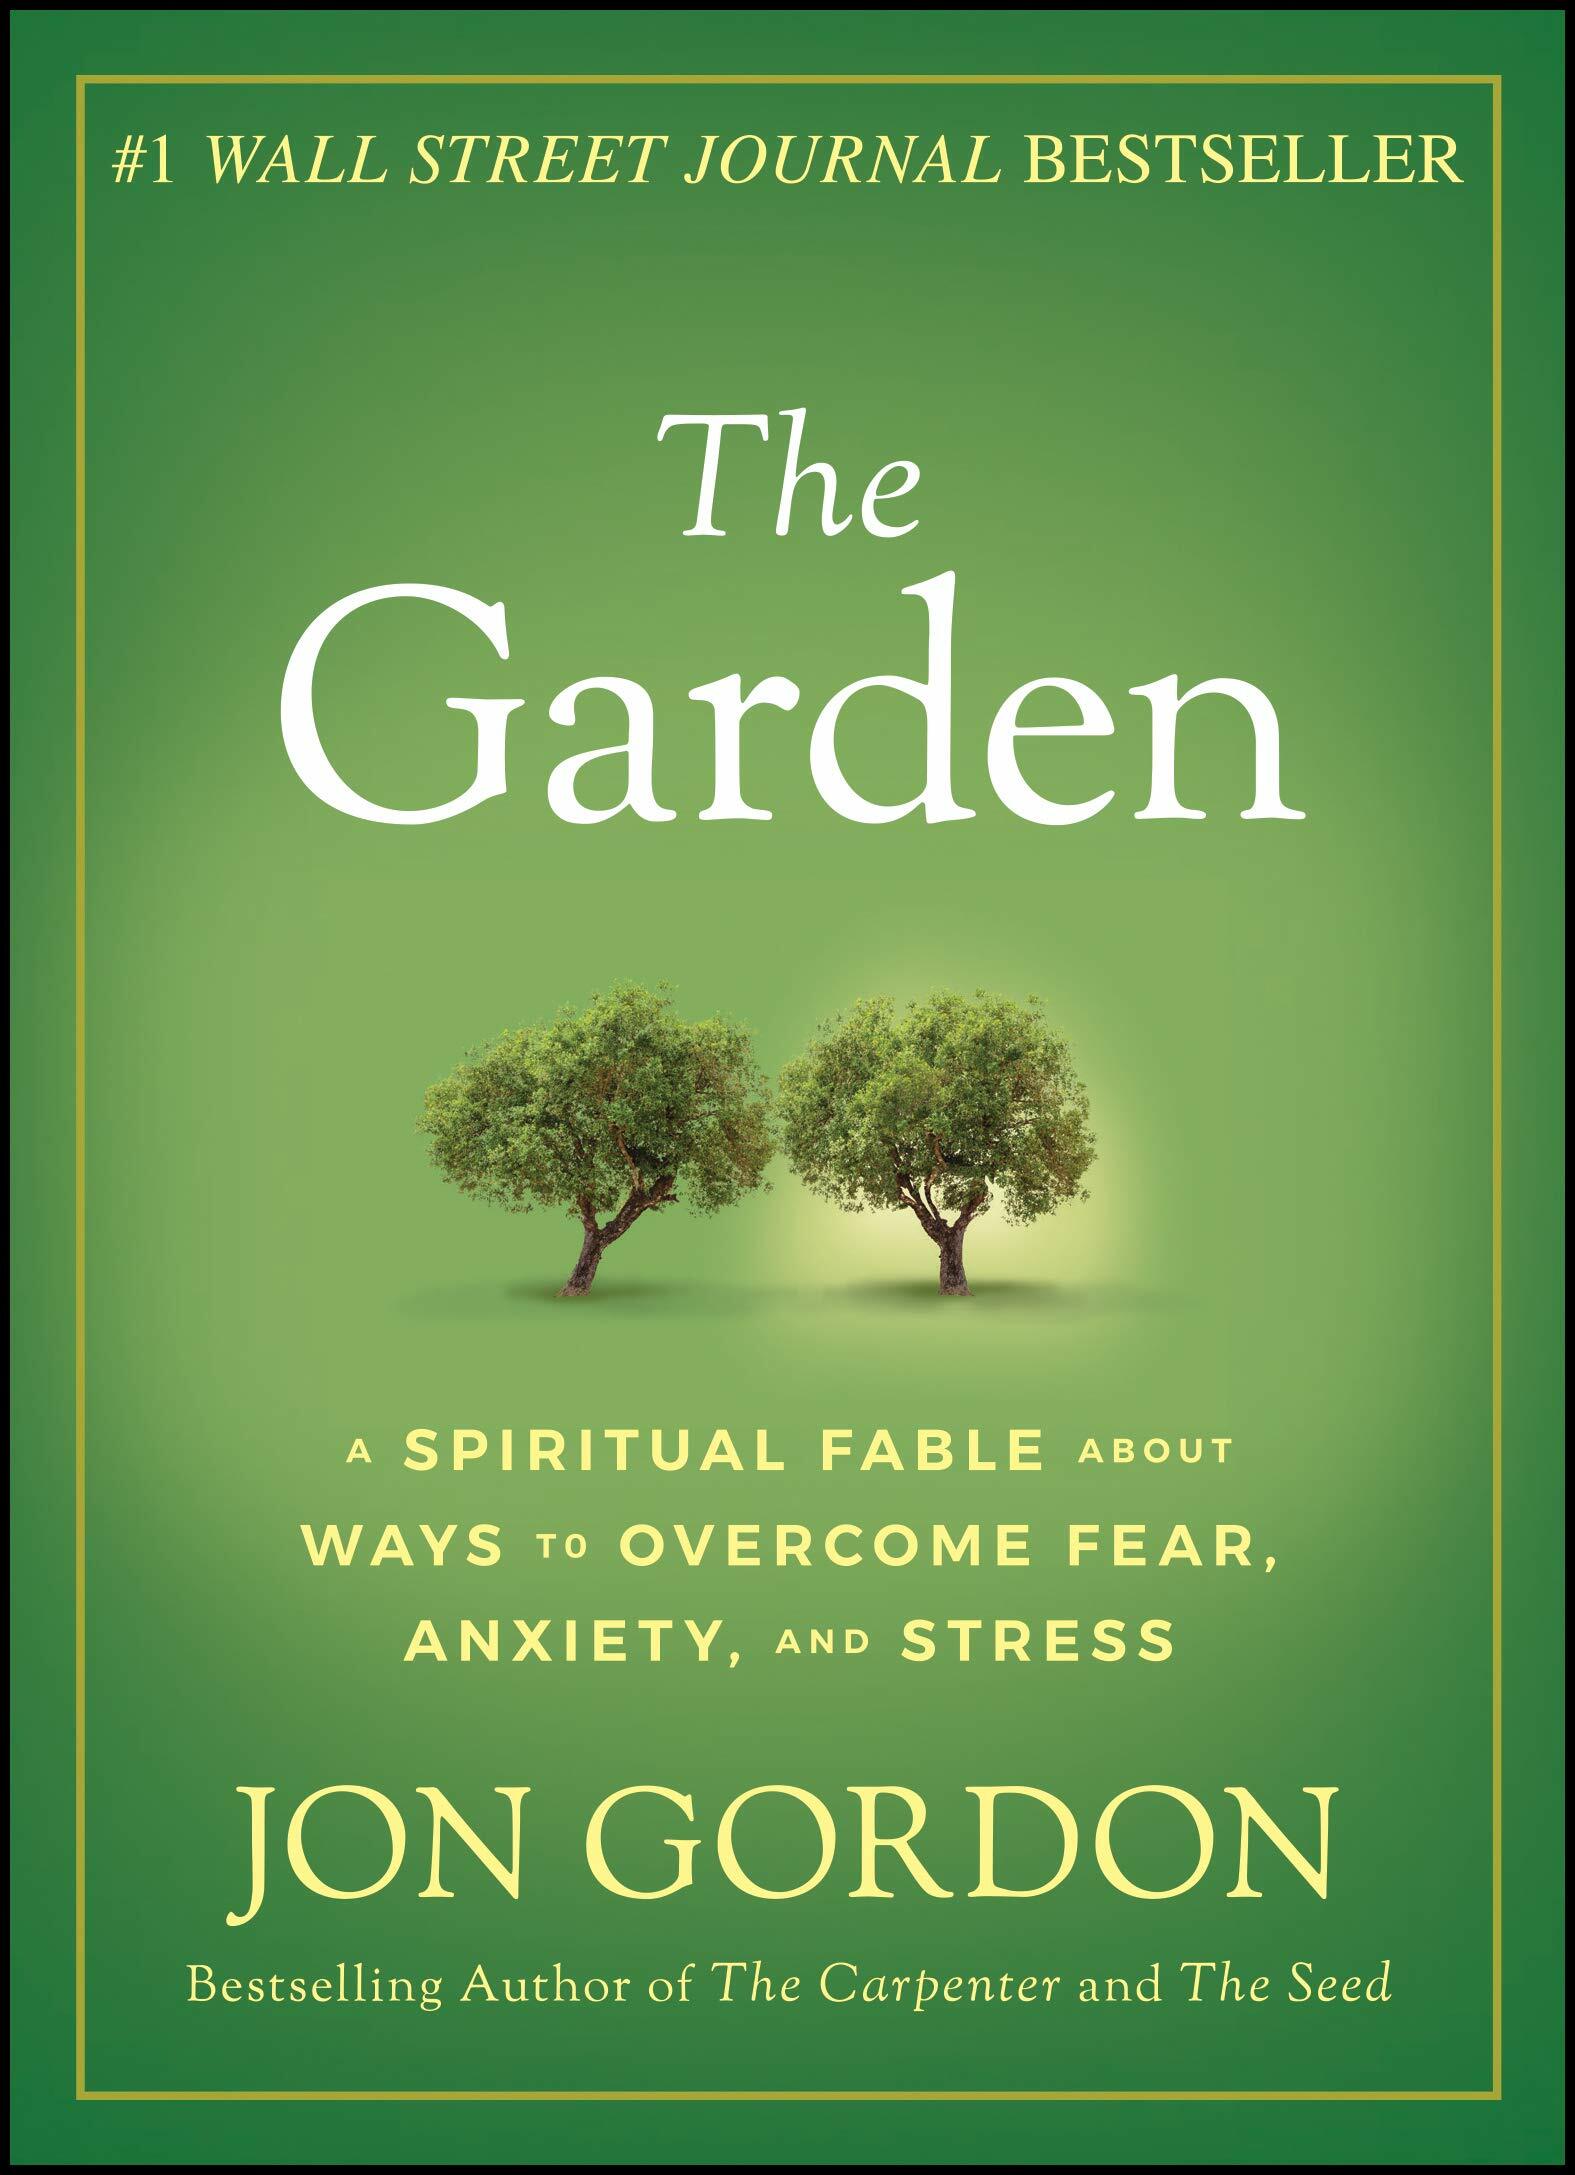 The Garden: A Spiritual Fable about Ways to Overcome Fear, Anxiety, and Stress (Hardcover)